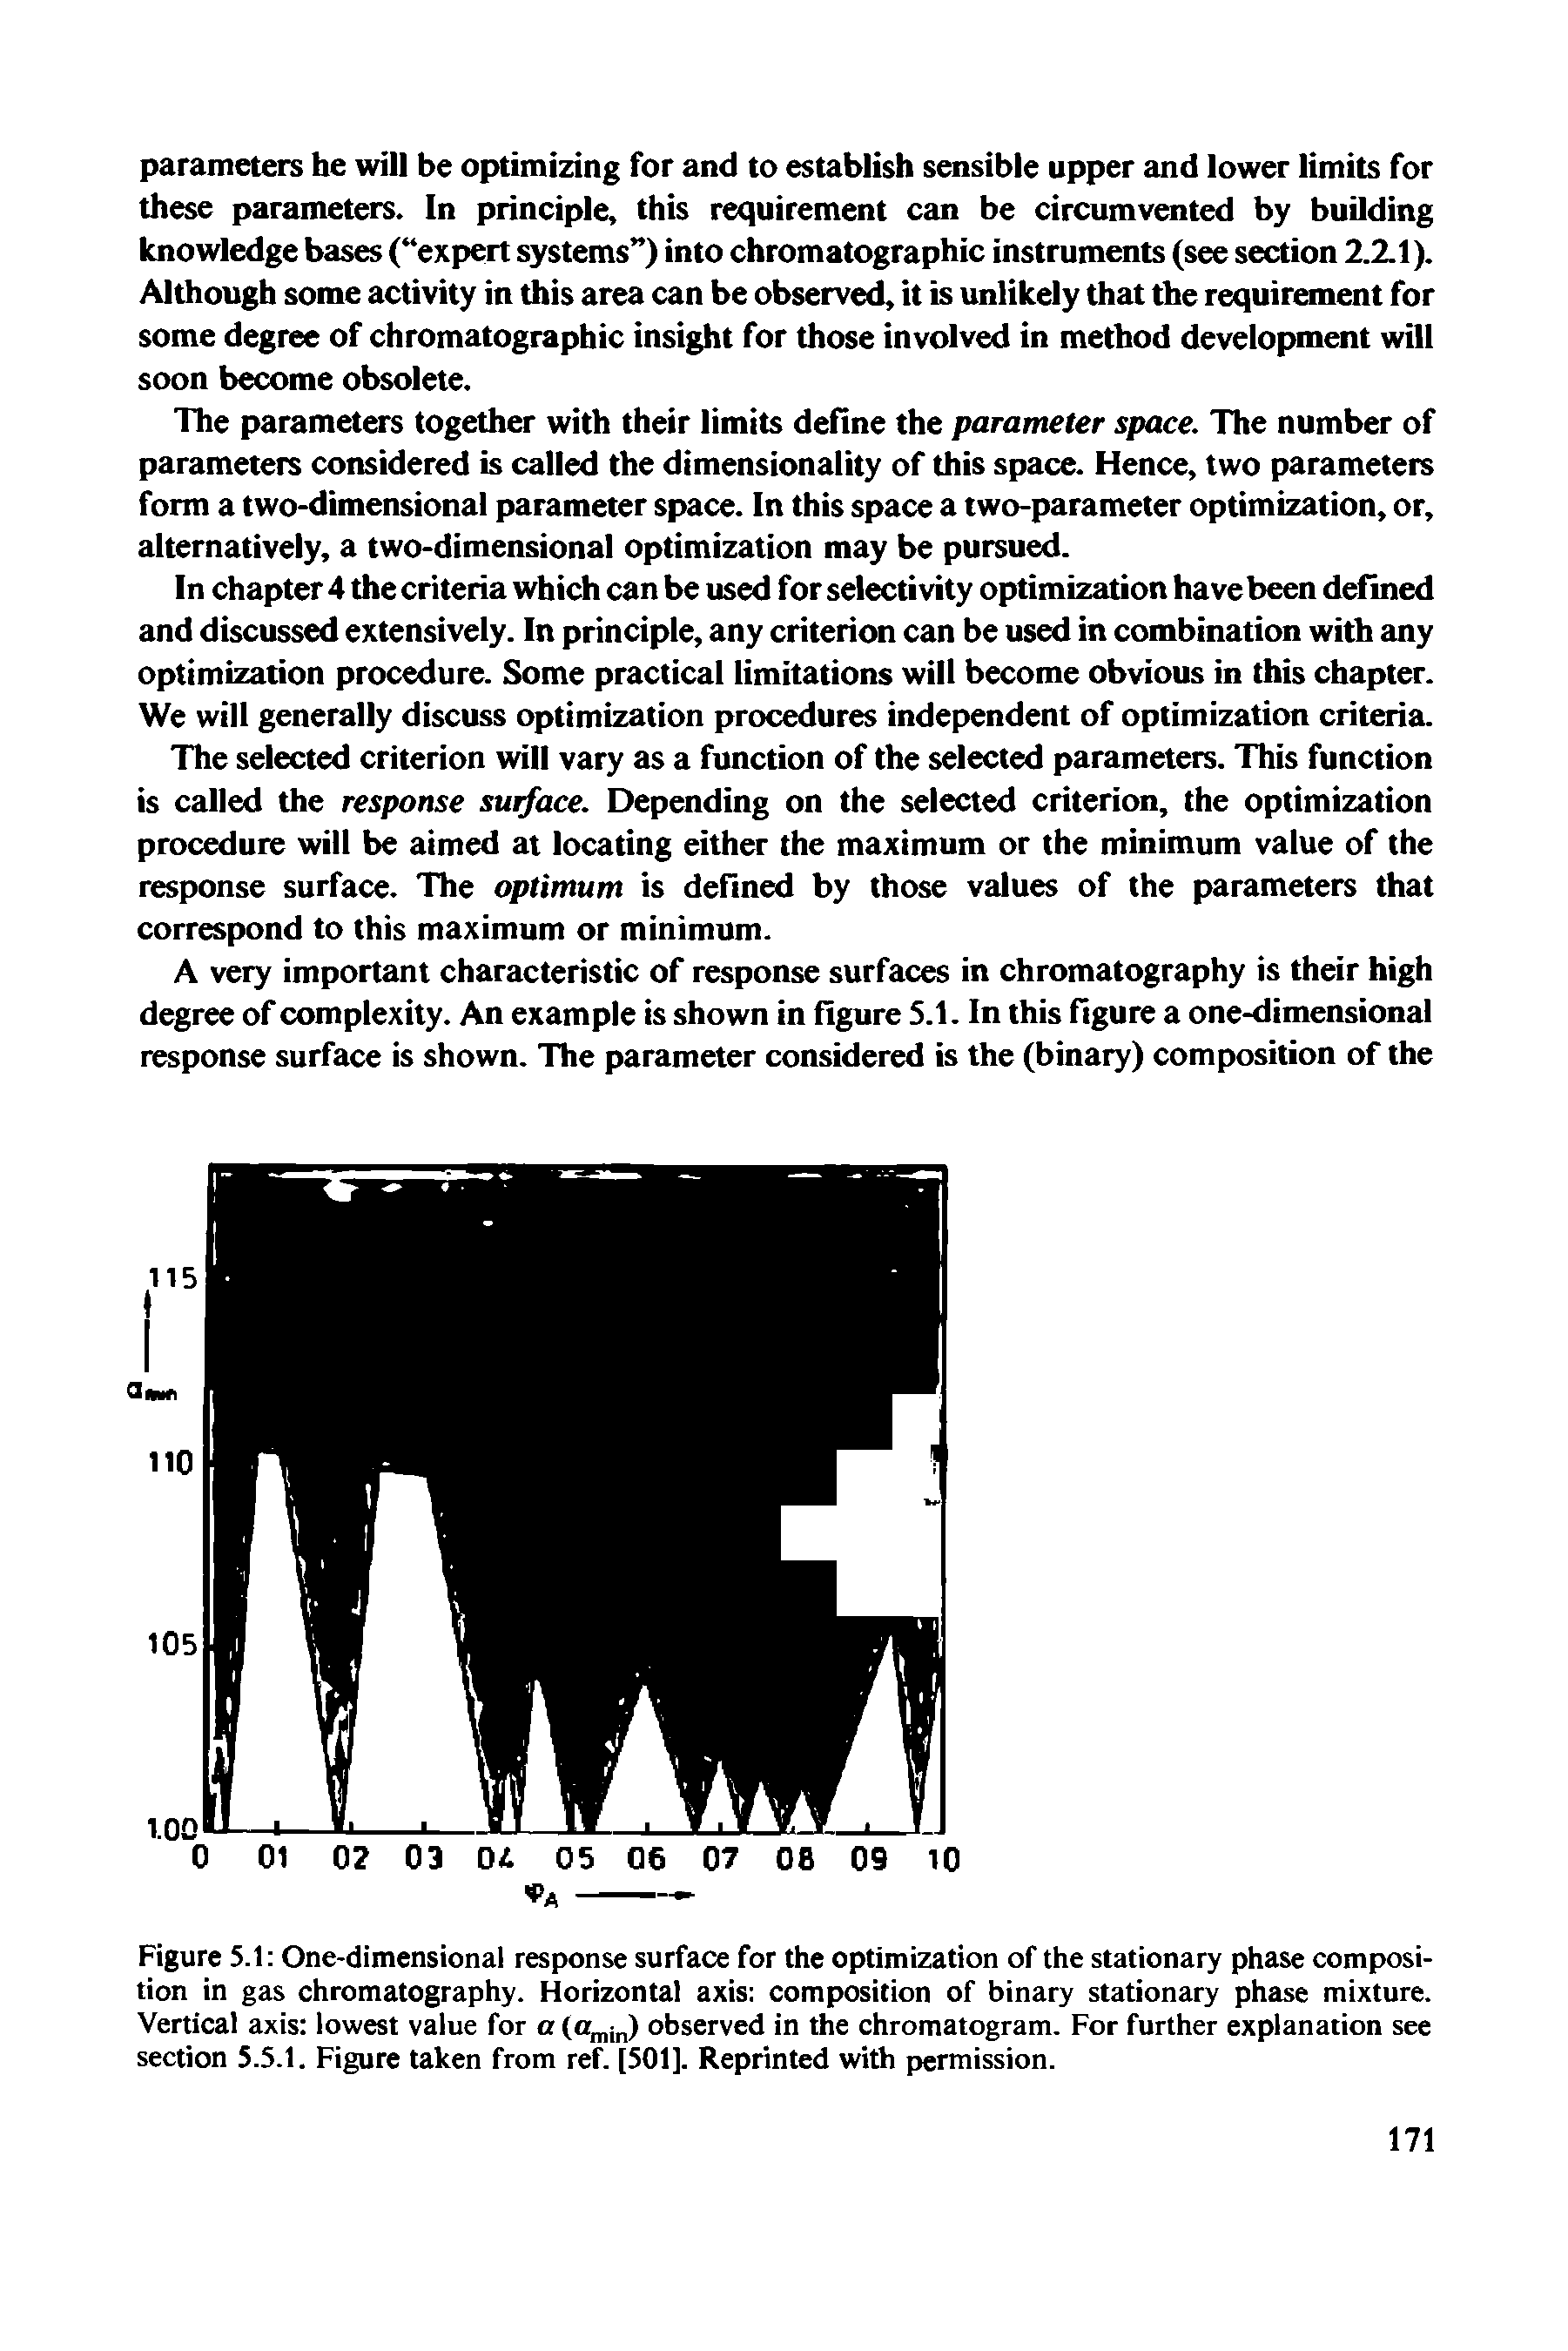 Figure 5.1 One-dimensional response surface for the optimization of the stationary phase composition in gas chromatography. Horizontal axis composition of binary stationary phase mixture. Vertical axis lowest value for a(amin) observed in the chromatogram. For further explanation see section 5.5.1. Figure taken from ref. [501]. Reprinted with permission.